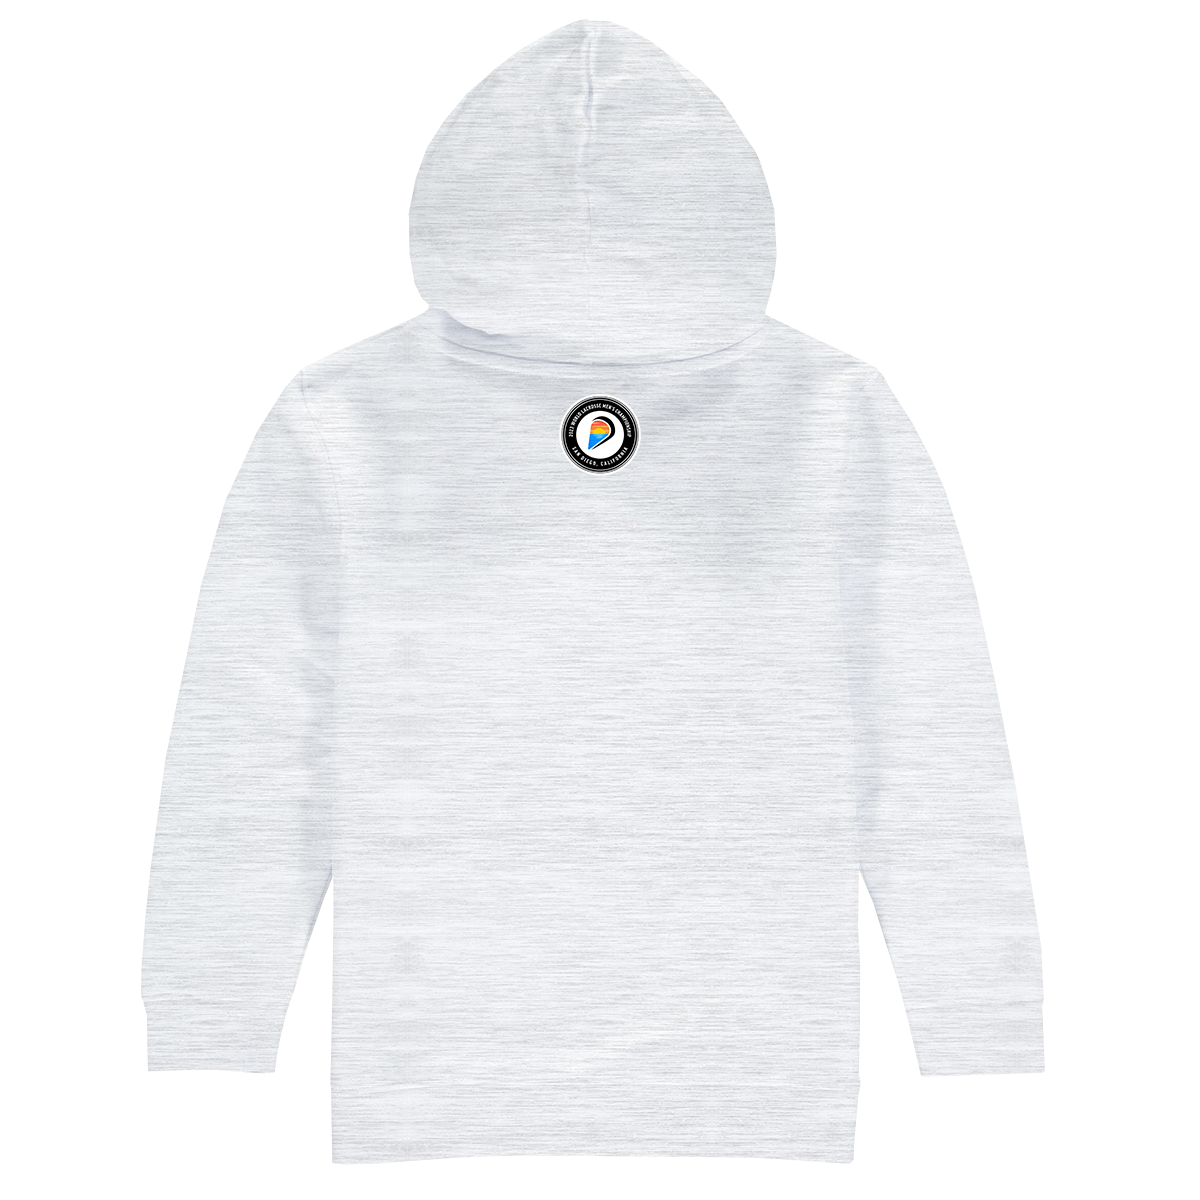 New Zealand Classic Youth Hoodie Athletic Grey